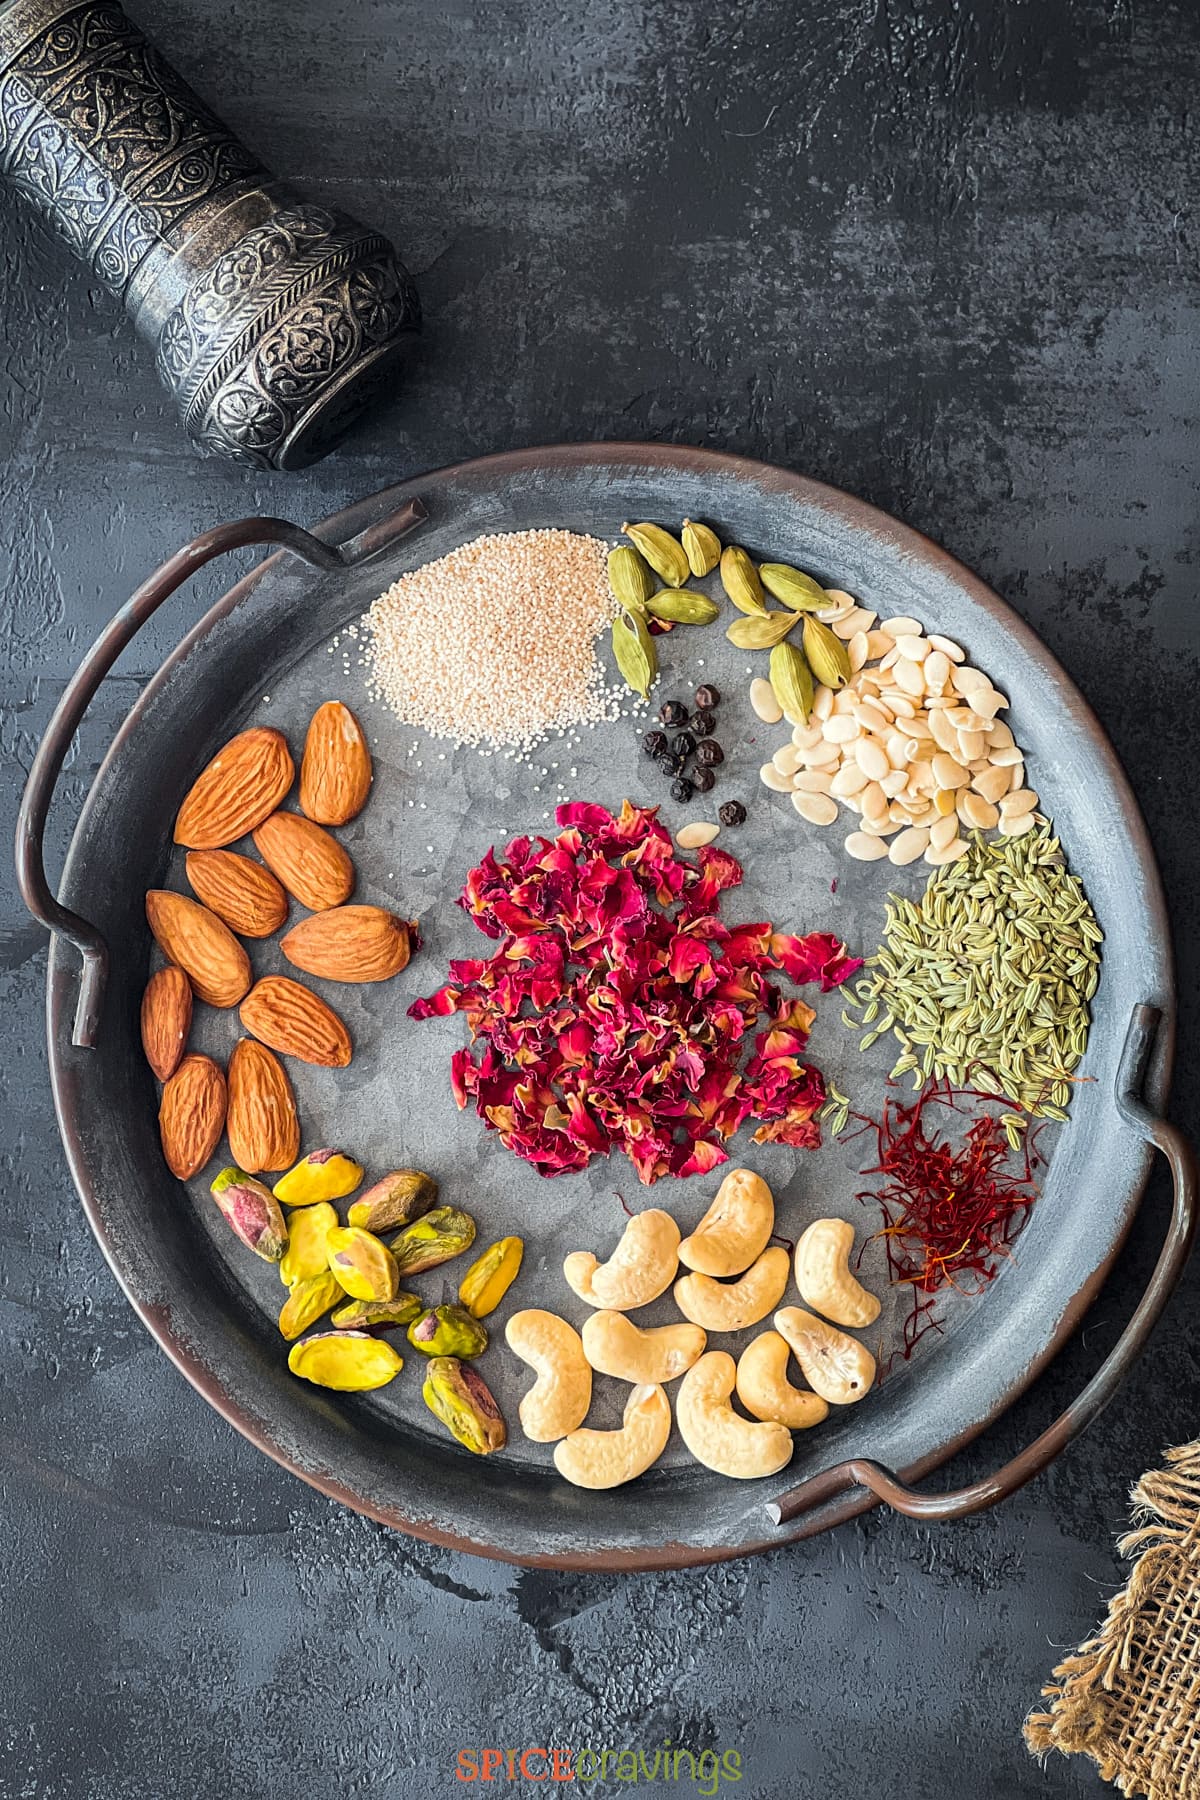 Metal plate with rose petals, nuts, seeds and whole spices